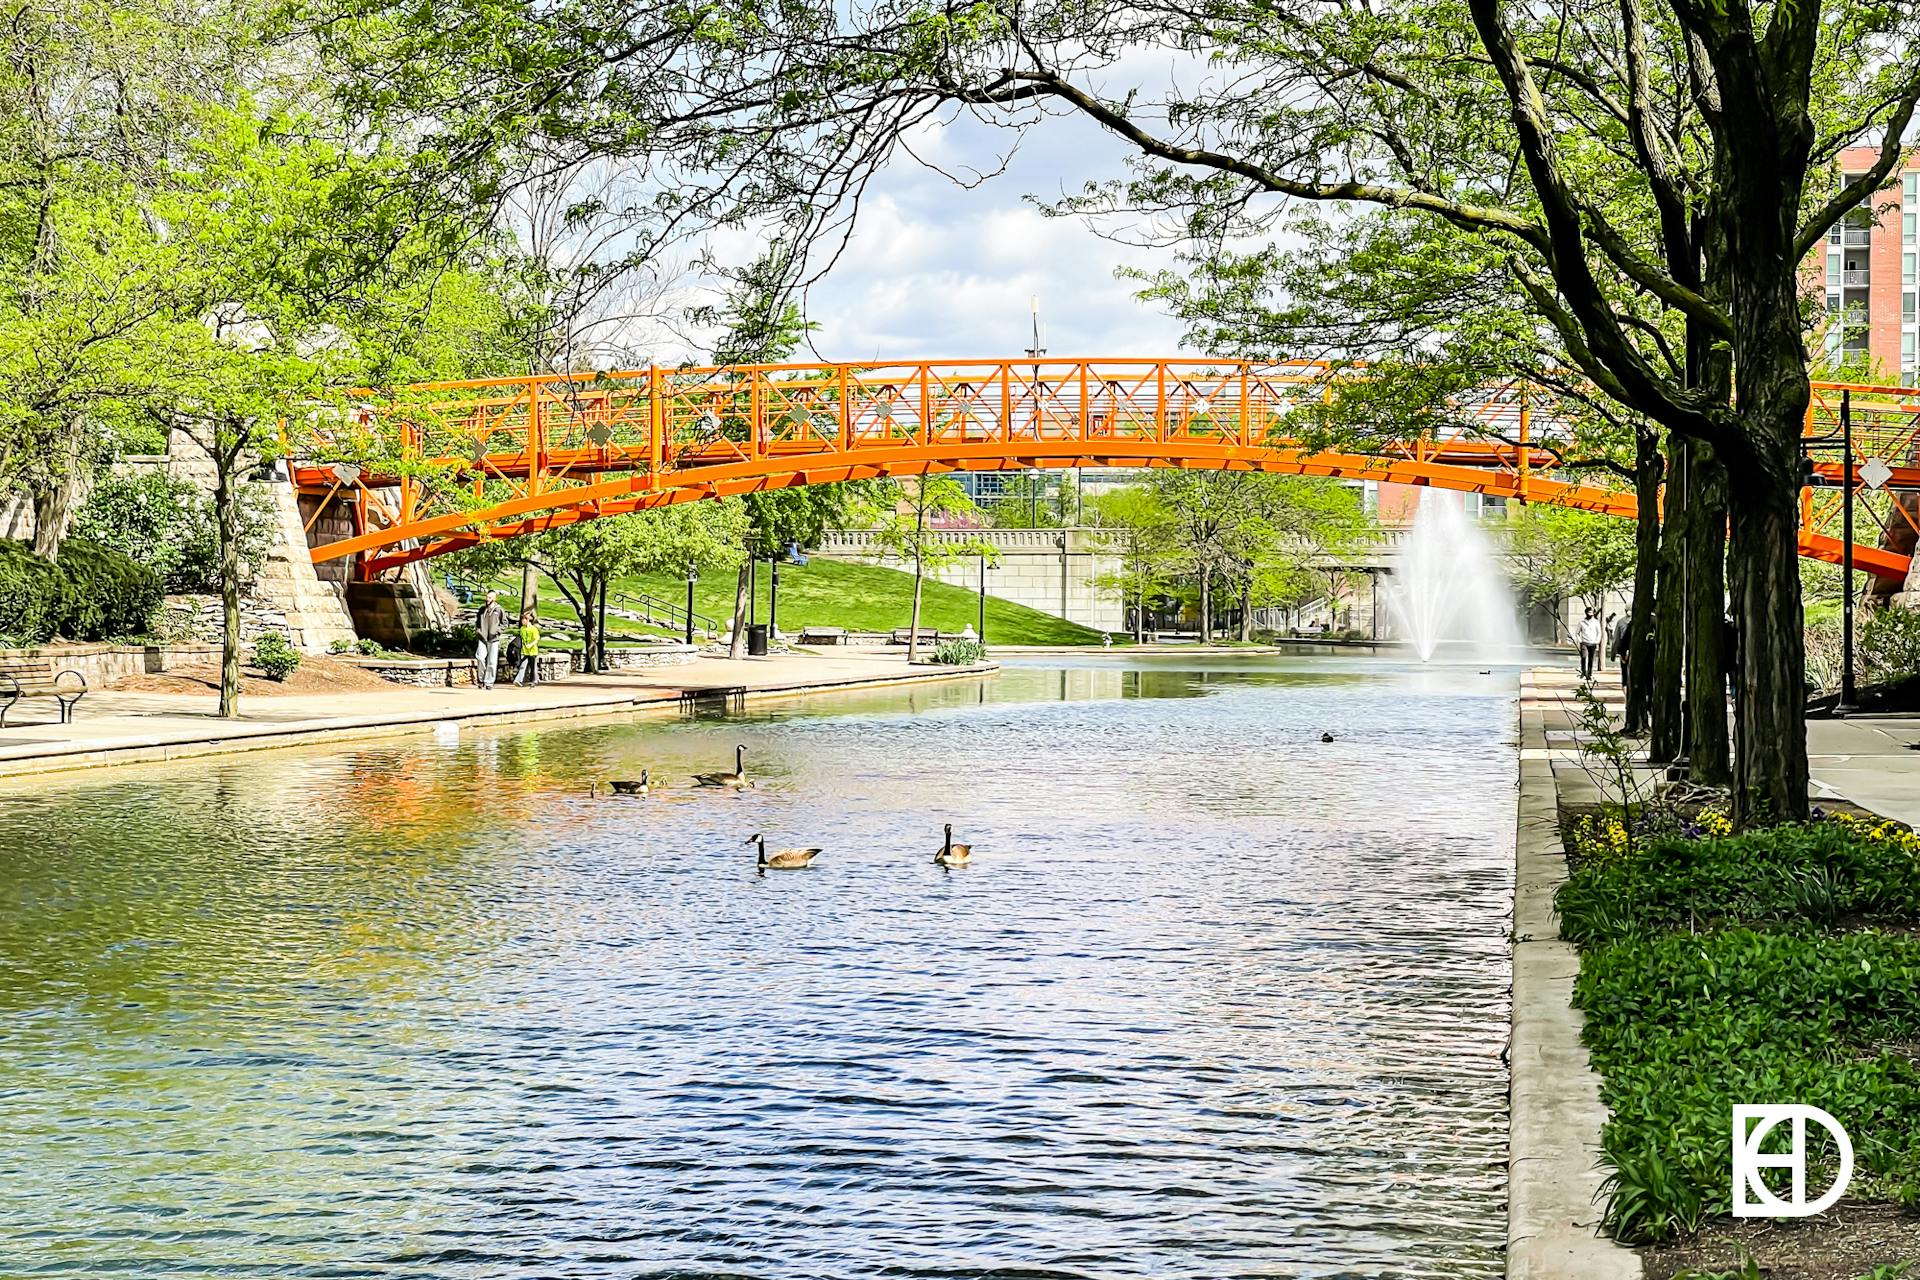 Photo of bridge over Canal Walk with geese floating in Canal.